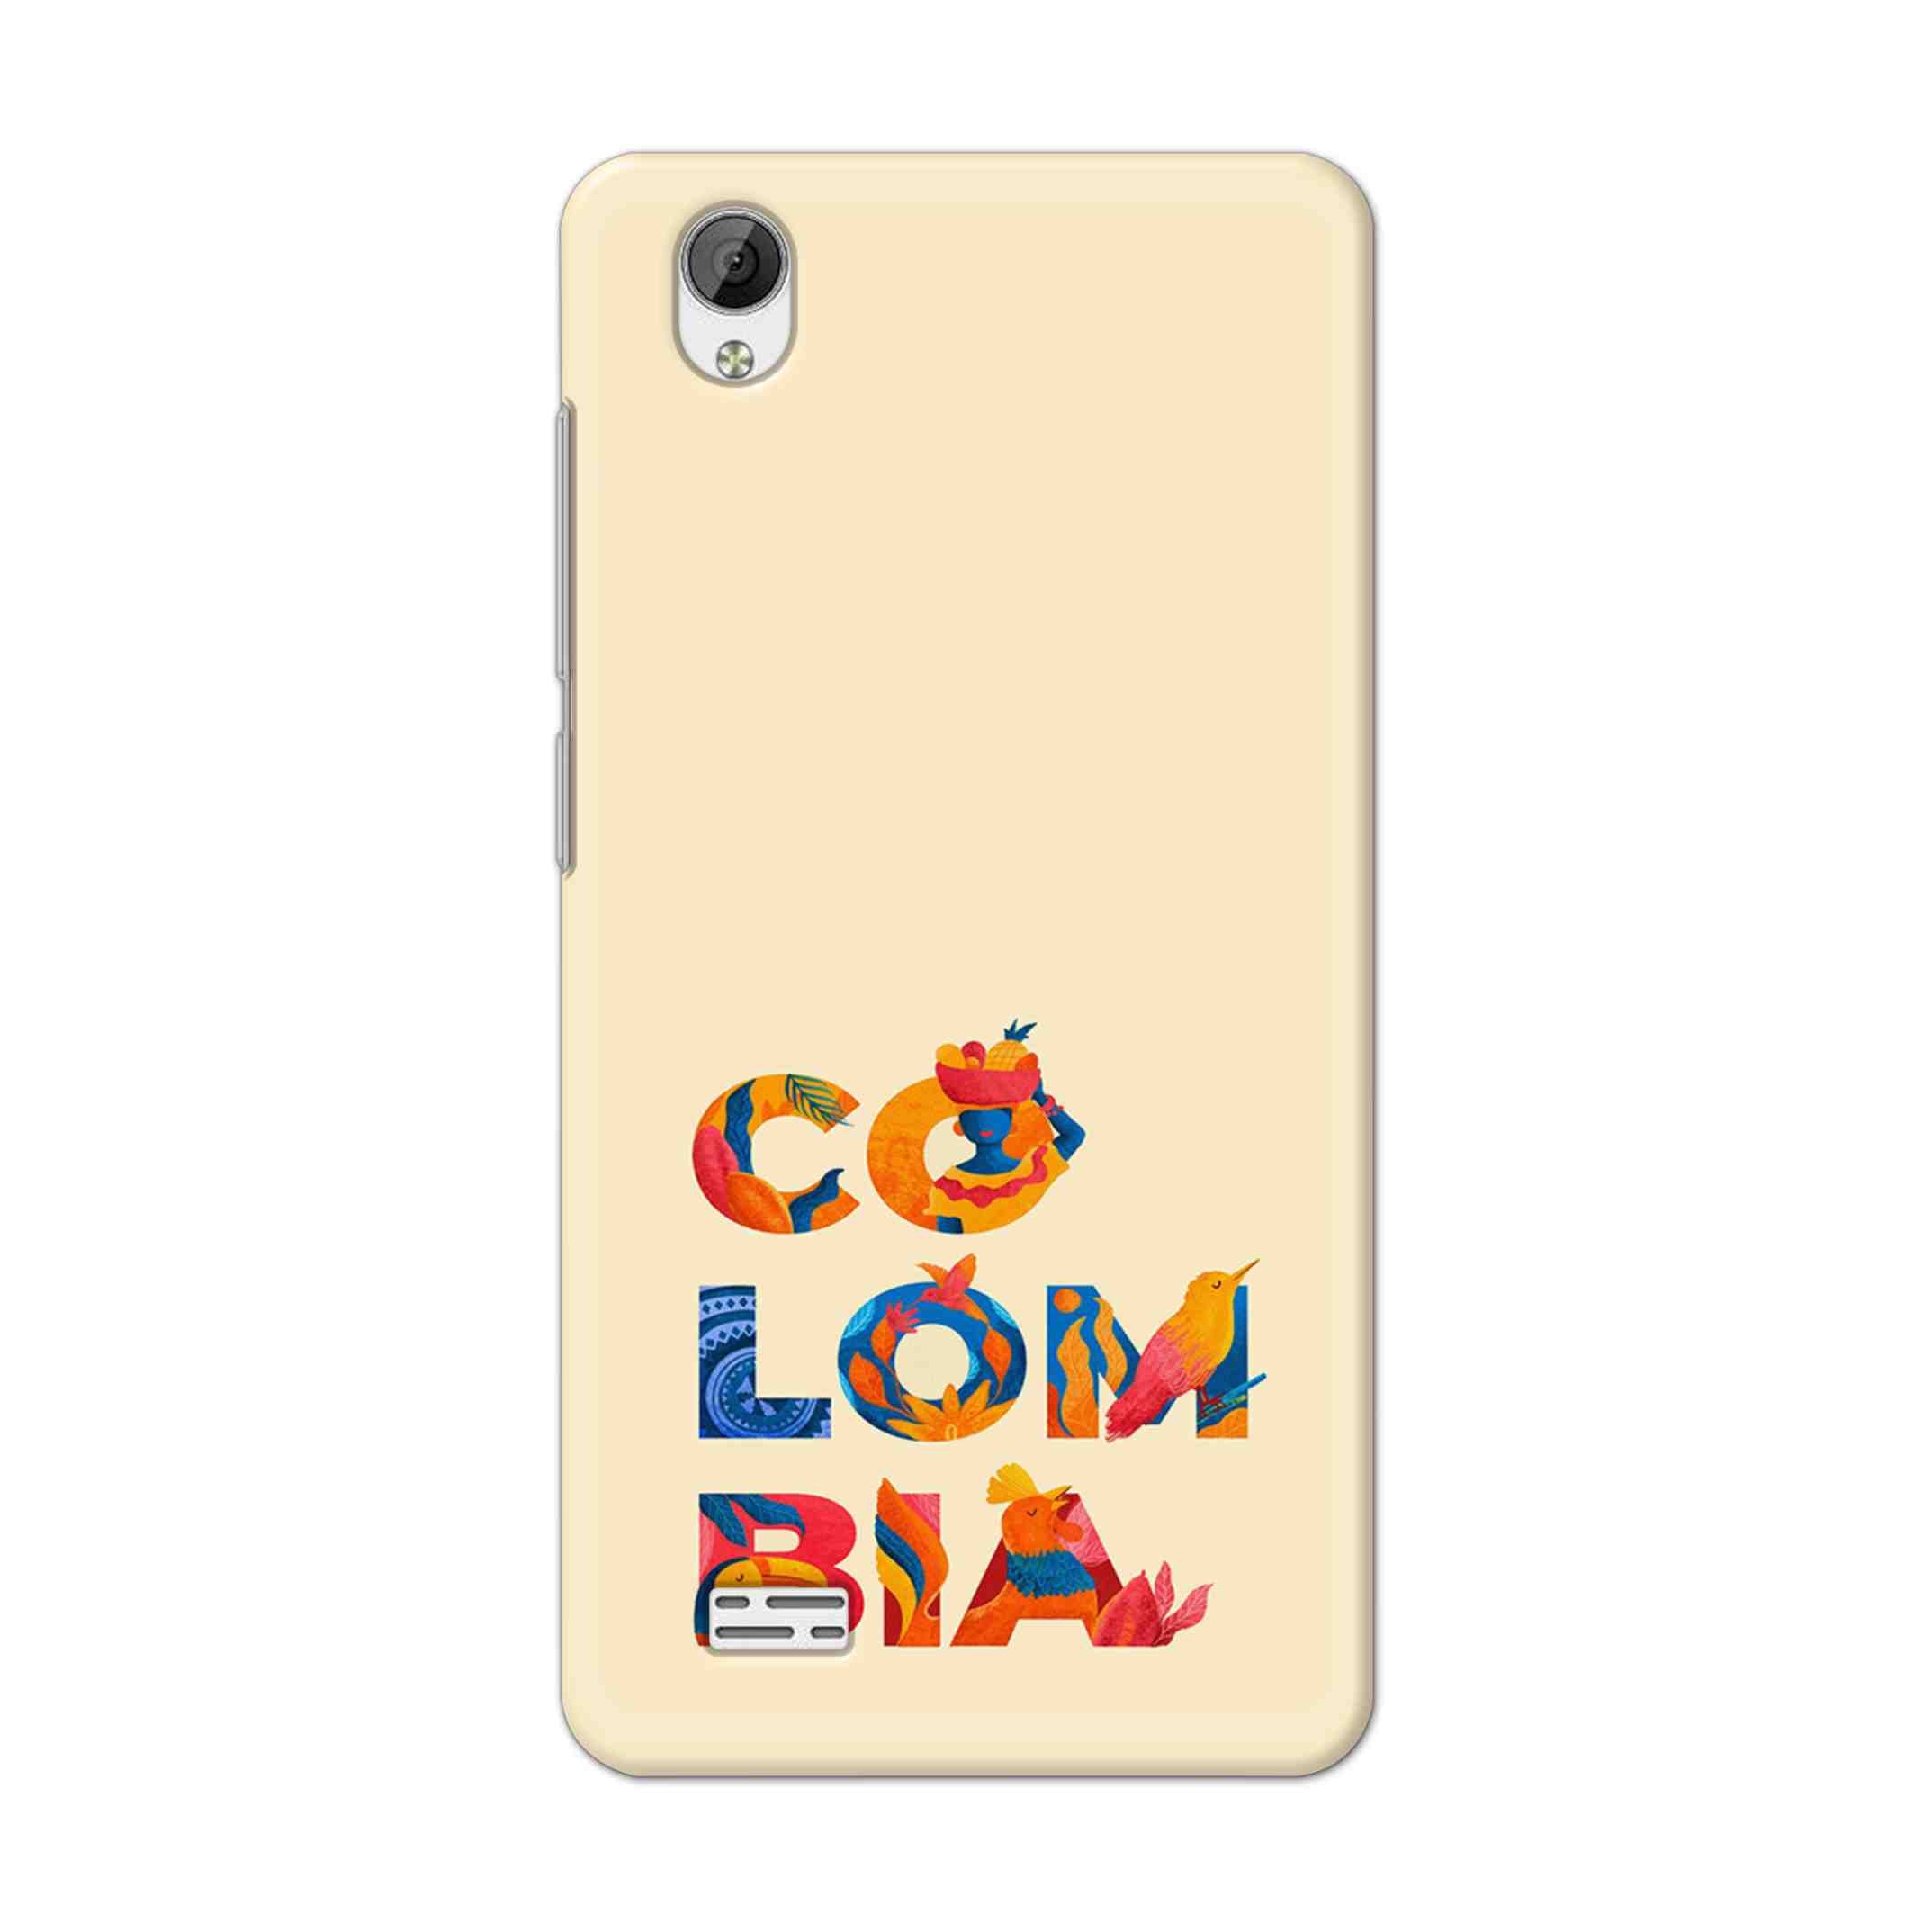 Buy Colombia Hard Back Mobile Phone Case Cover For Vivo Y31 Online